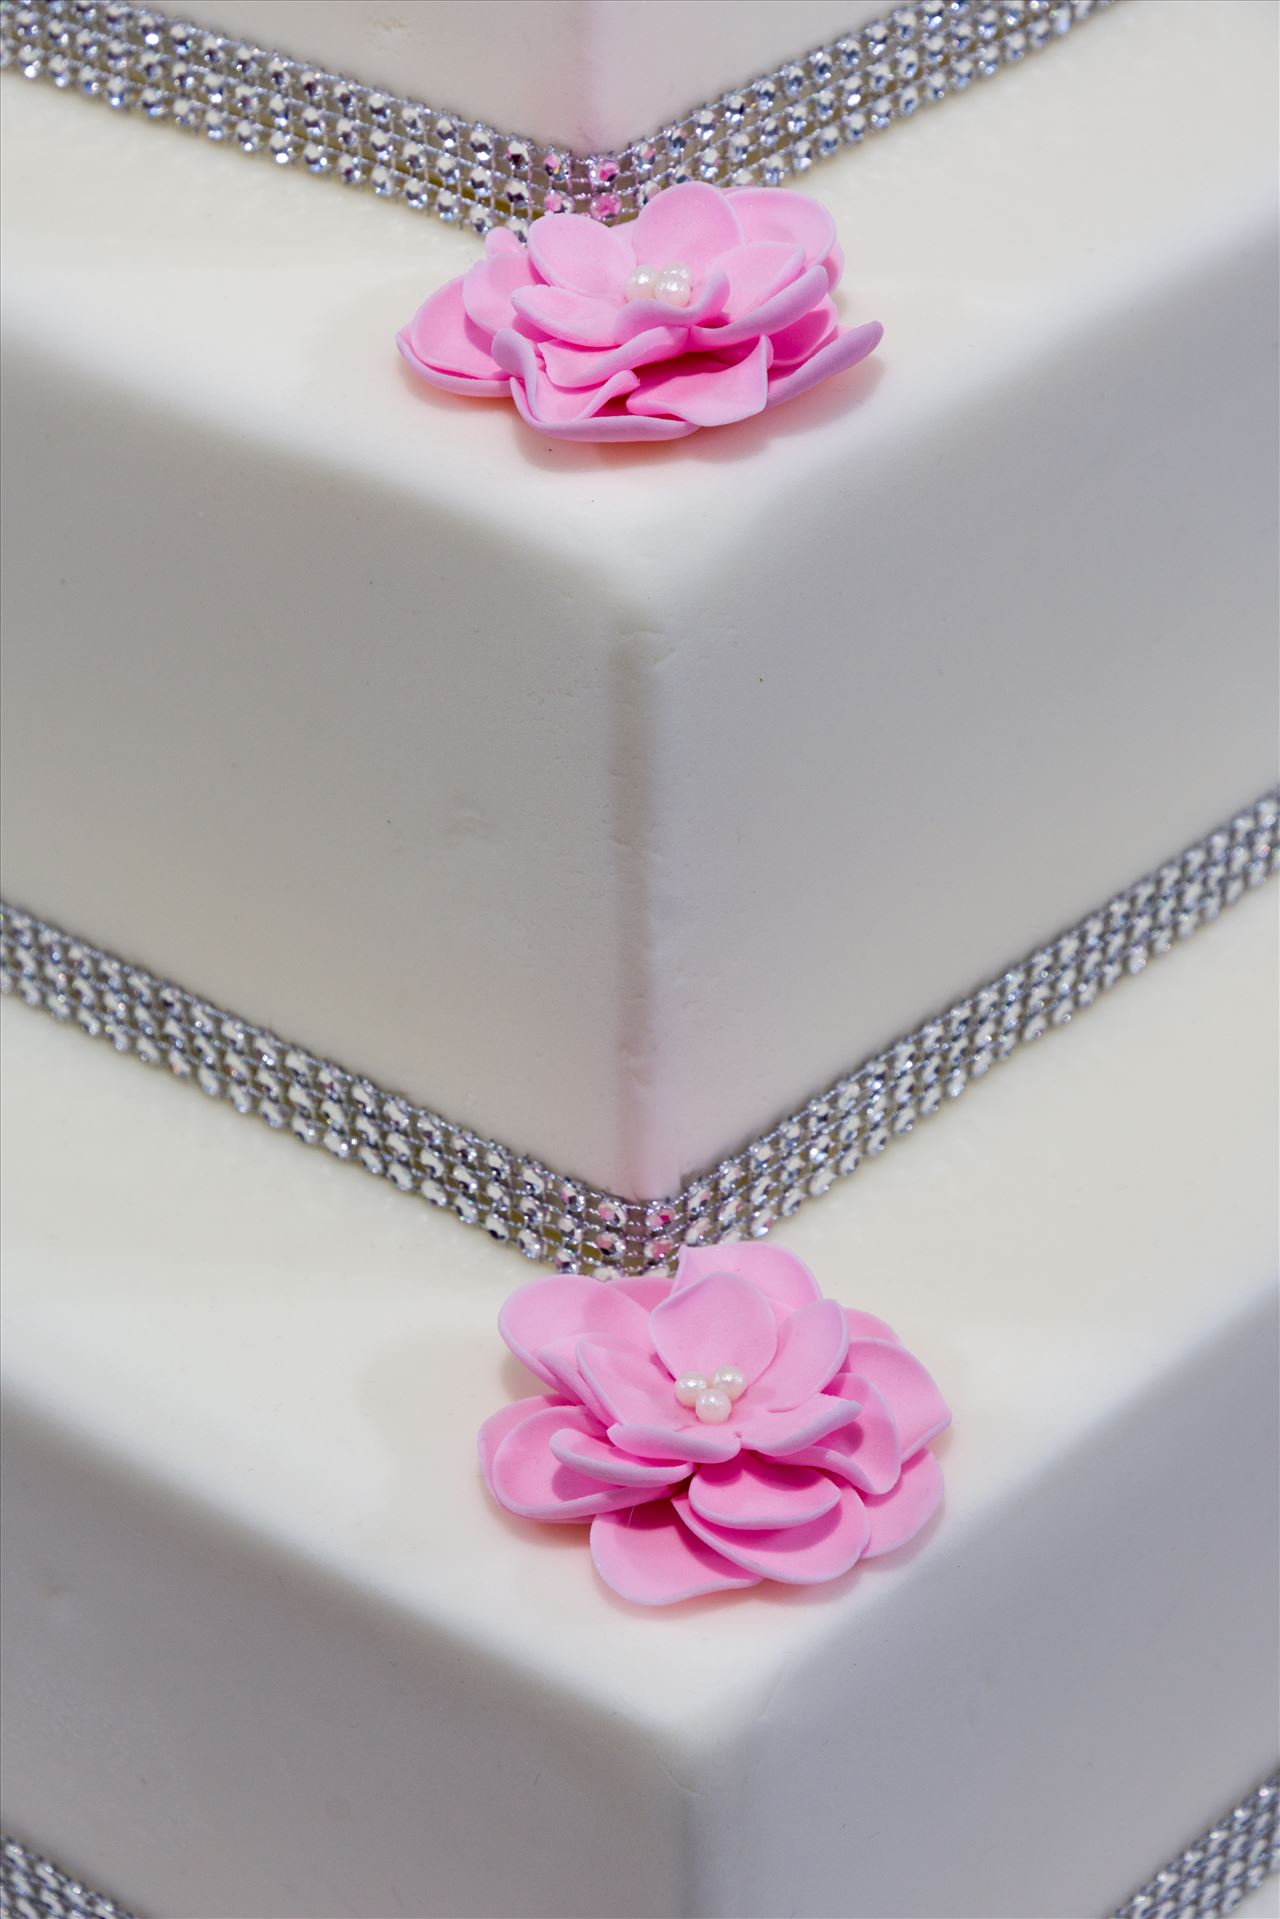 . I'm delighted to publish this photo of my 3 tier square cake design. The cake itself can be made in flavours to suit and also designs to suit. I love the simple but elegant finish to this. by Alison Wonderland Bakes